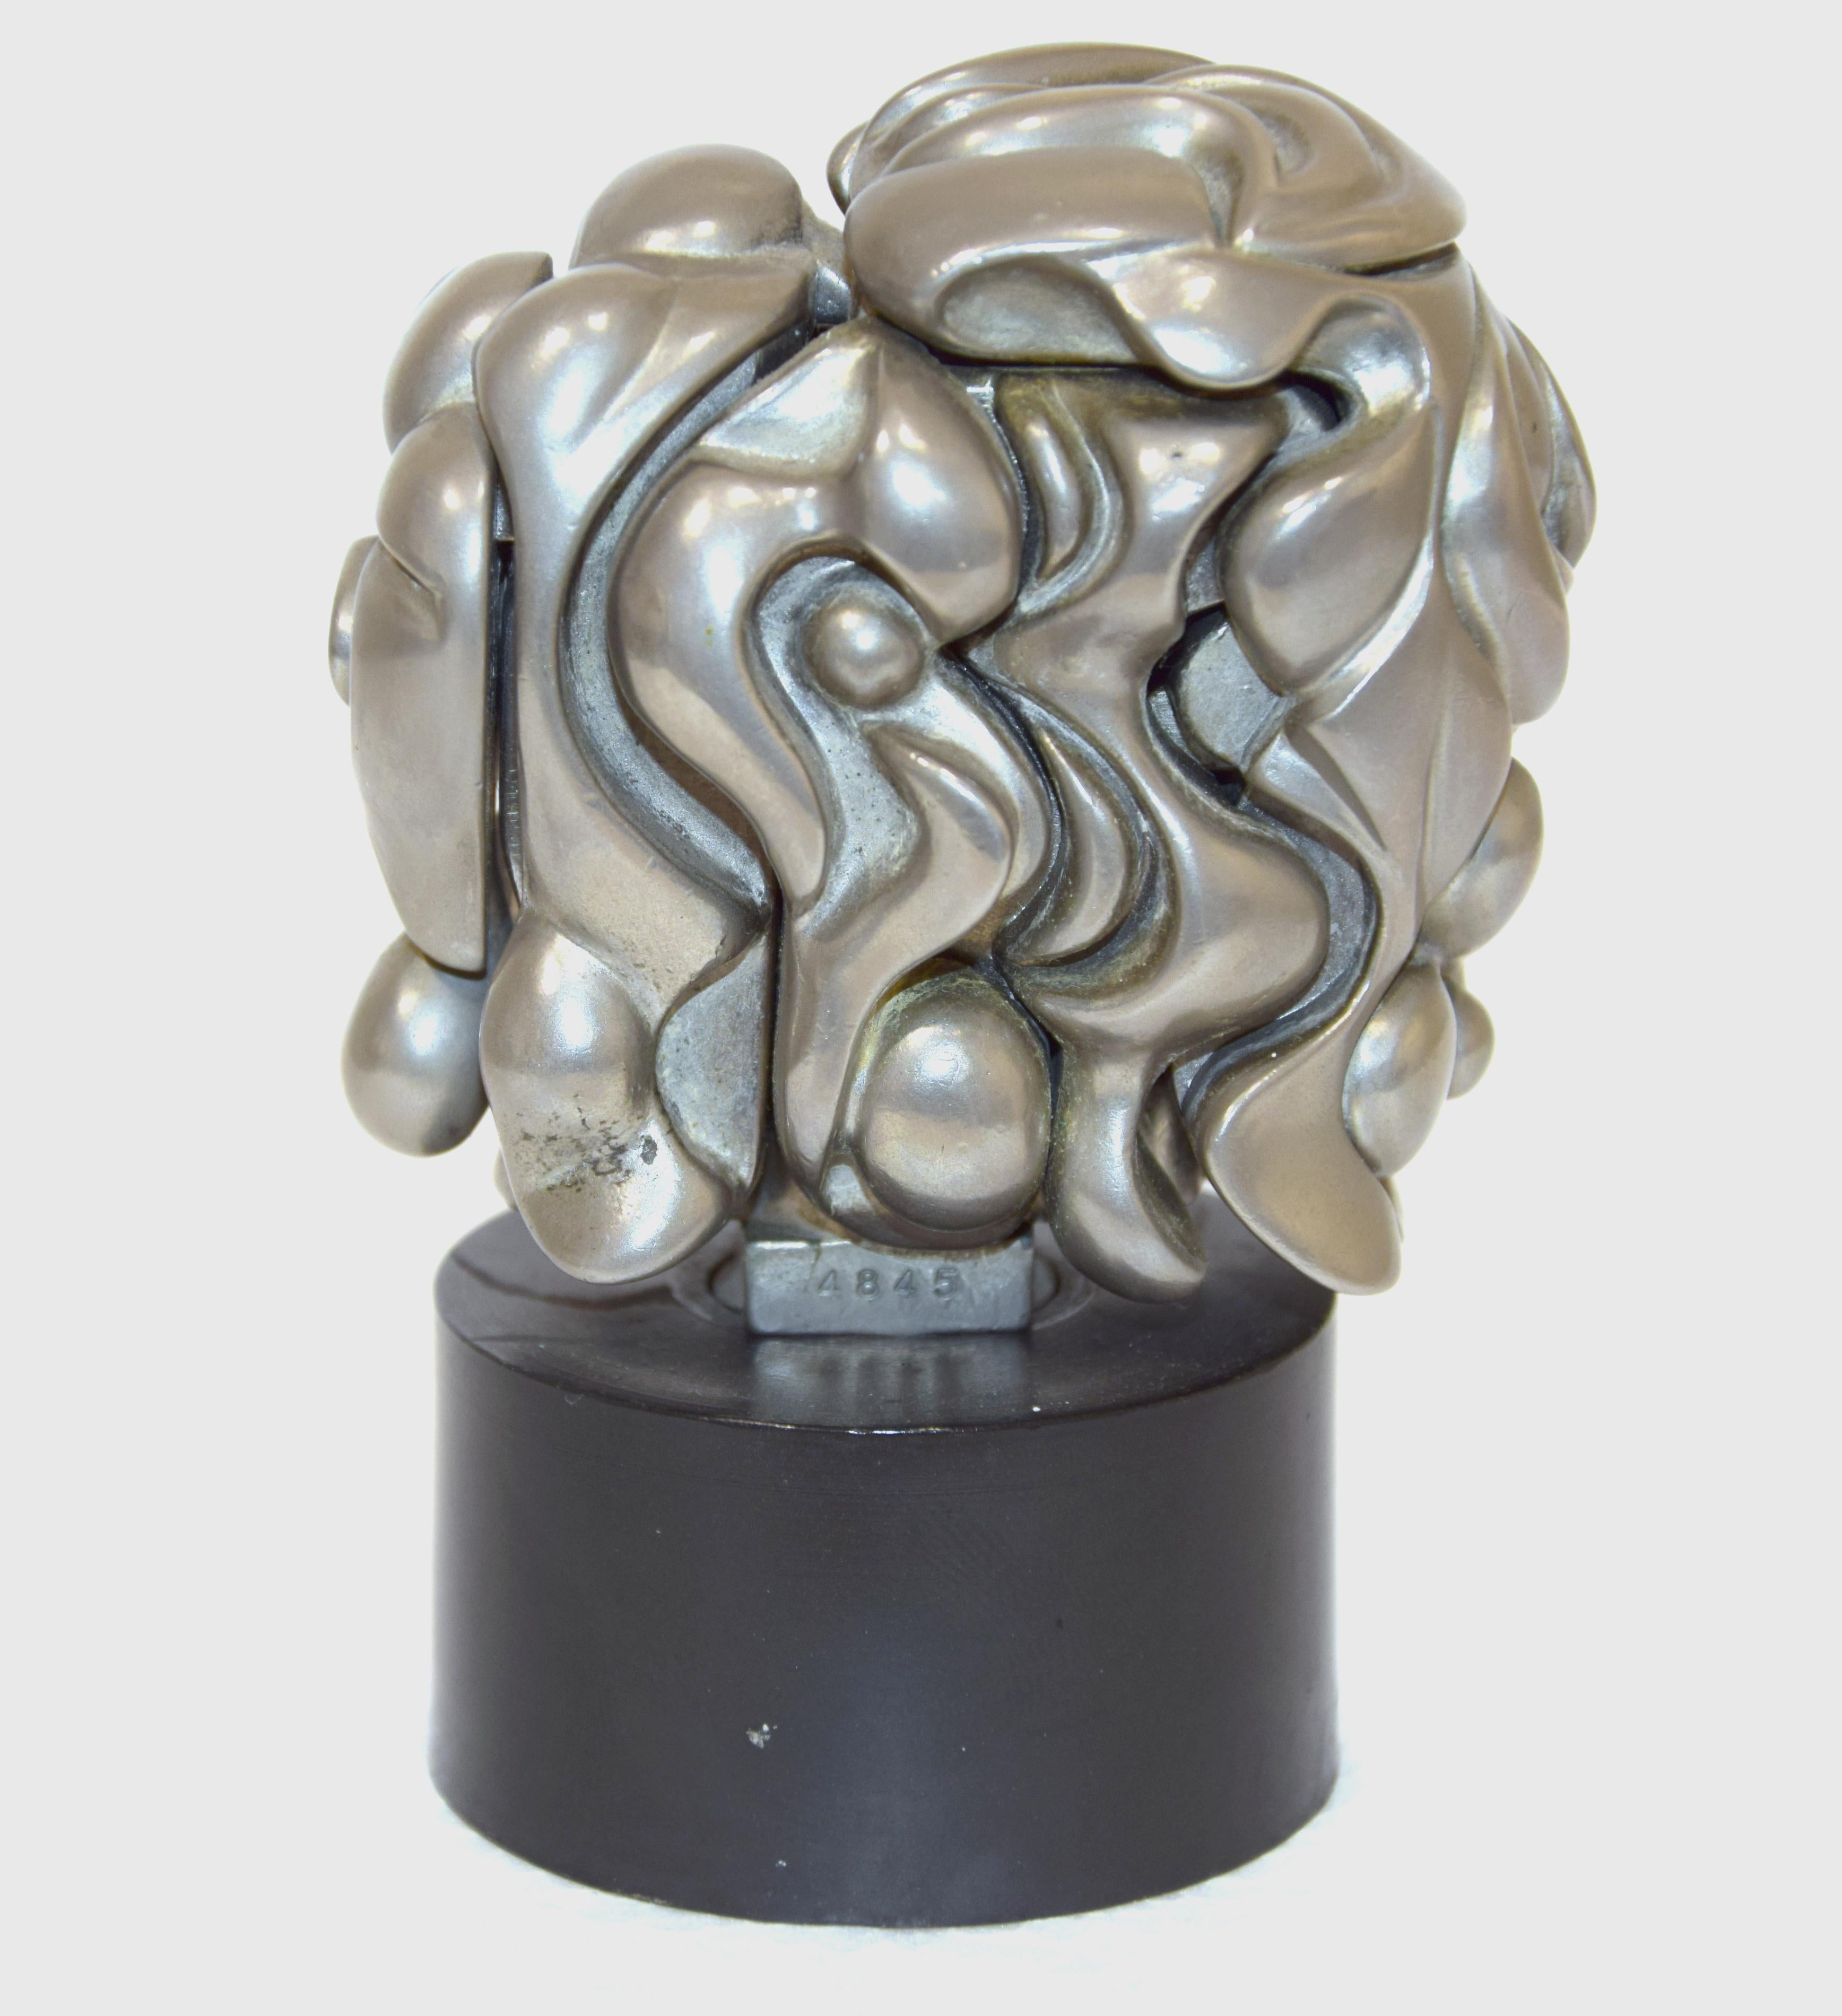 Portrait of Michele - Original Nickel Plated Sculpture by M. Berrocal - 1969 - Gray Figurative Sculpture by Miguel Berrocal